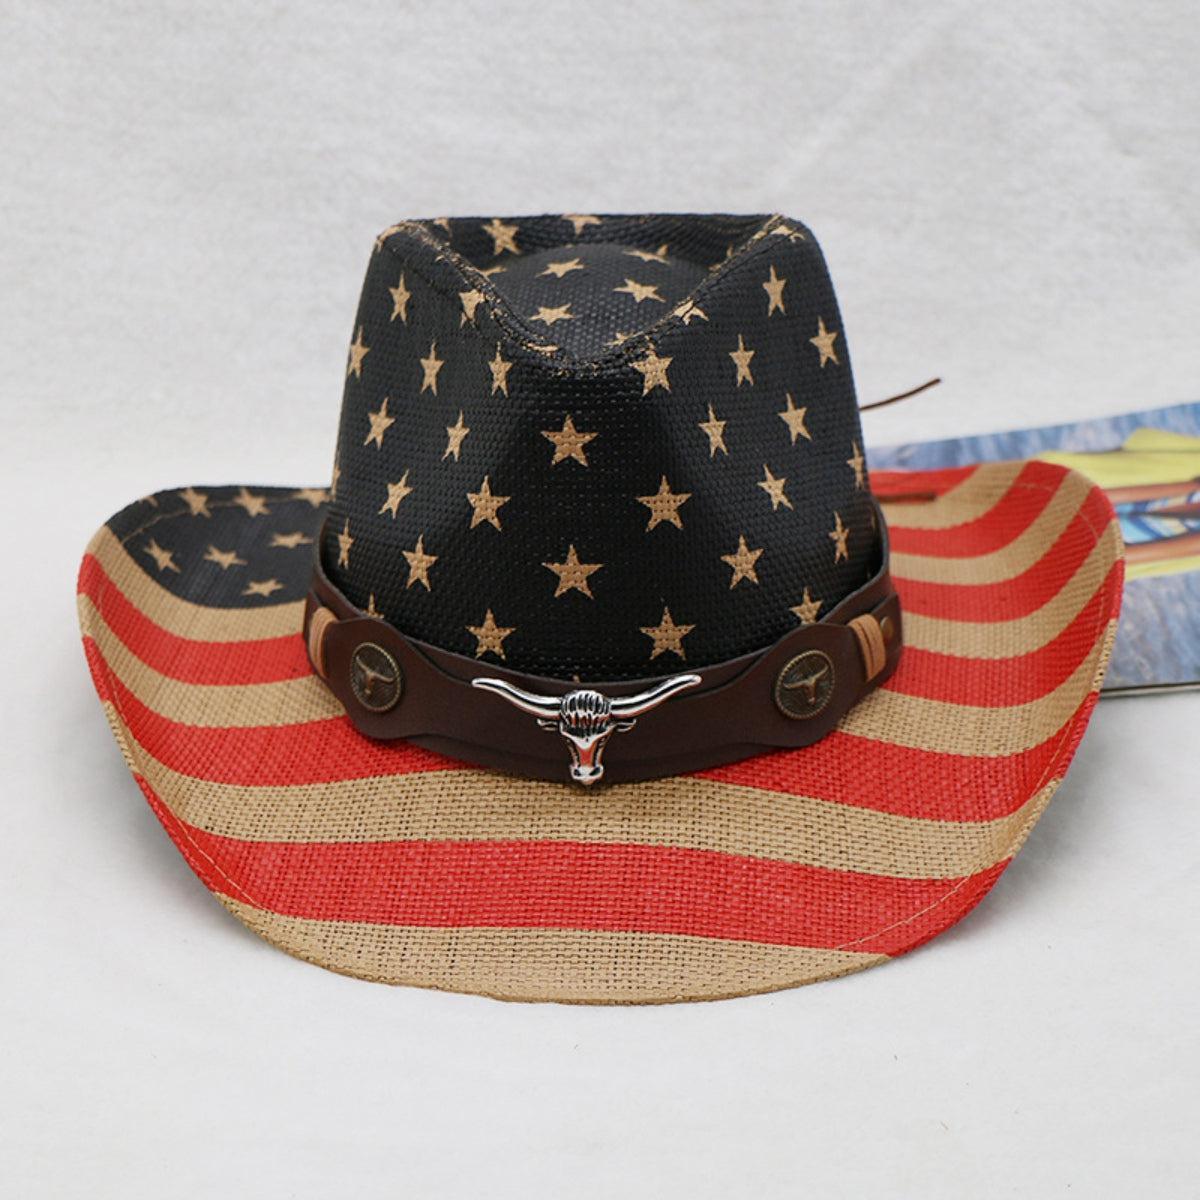 a black cowboy hat with stars on it